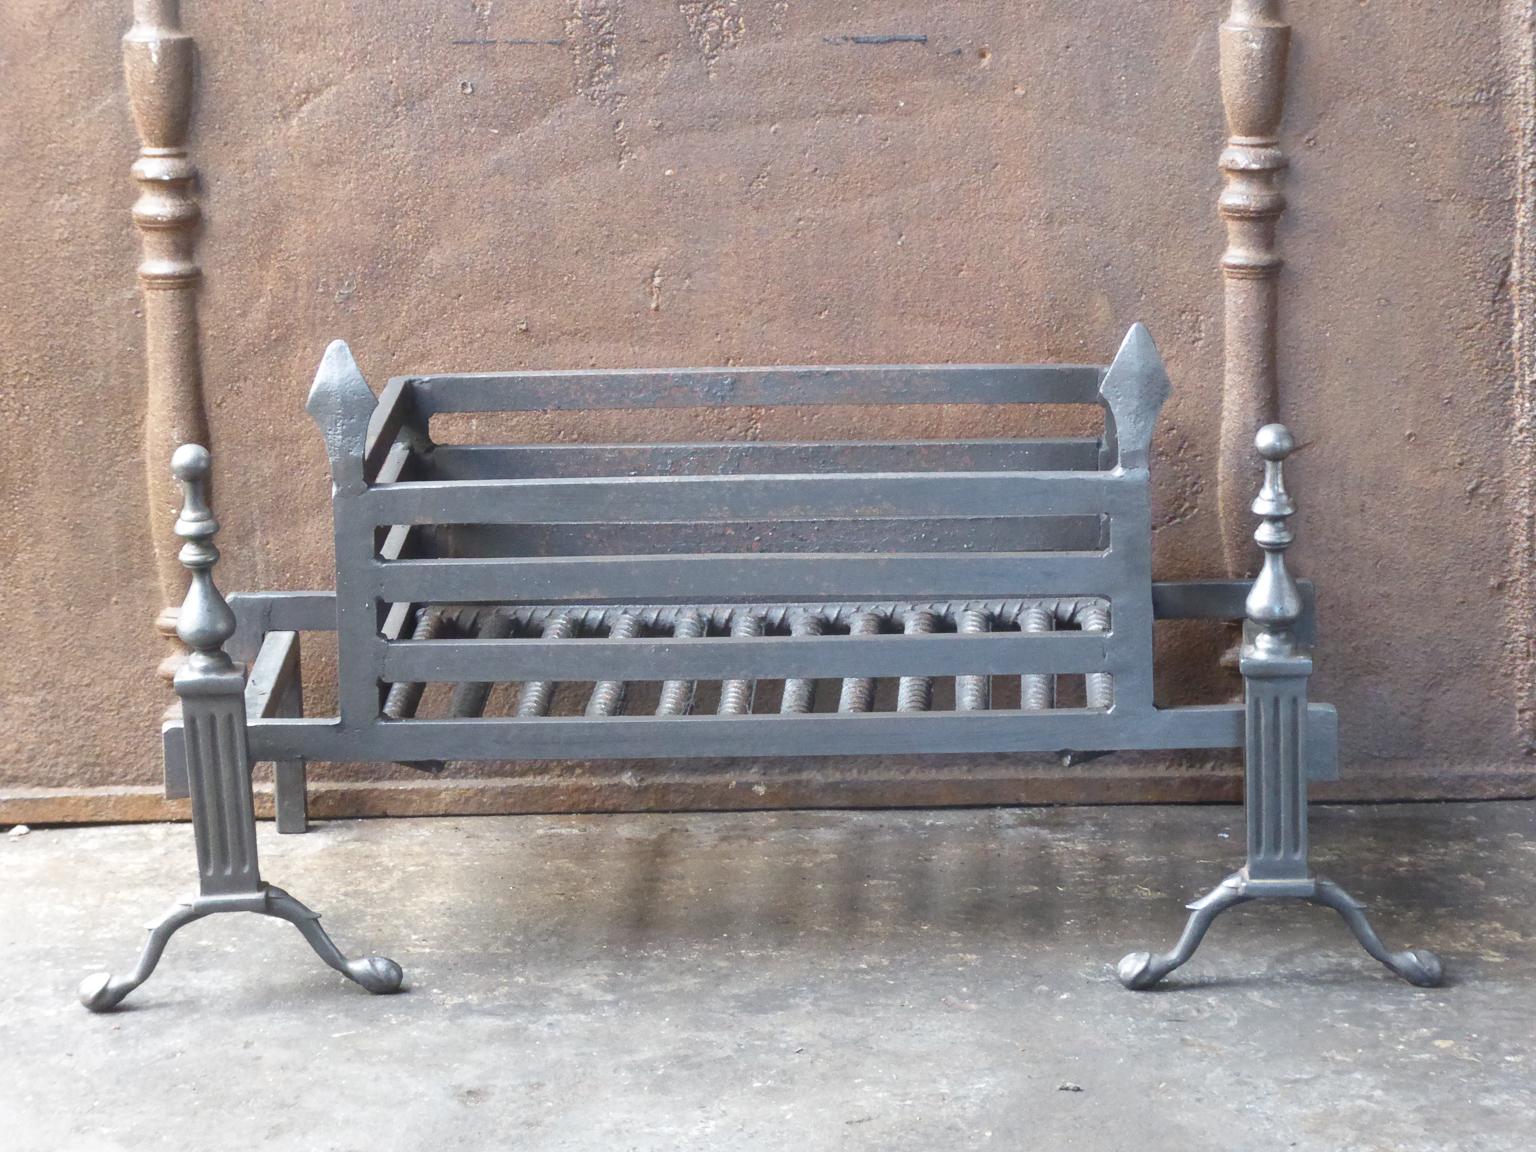 English Victorian style fireplace basket or fire basket. The fireplace grate is made of wrought iron and brass. The total width of the front of the grate is 35 inch (89 cm).

















 